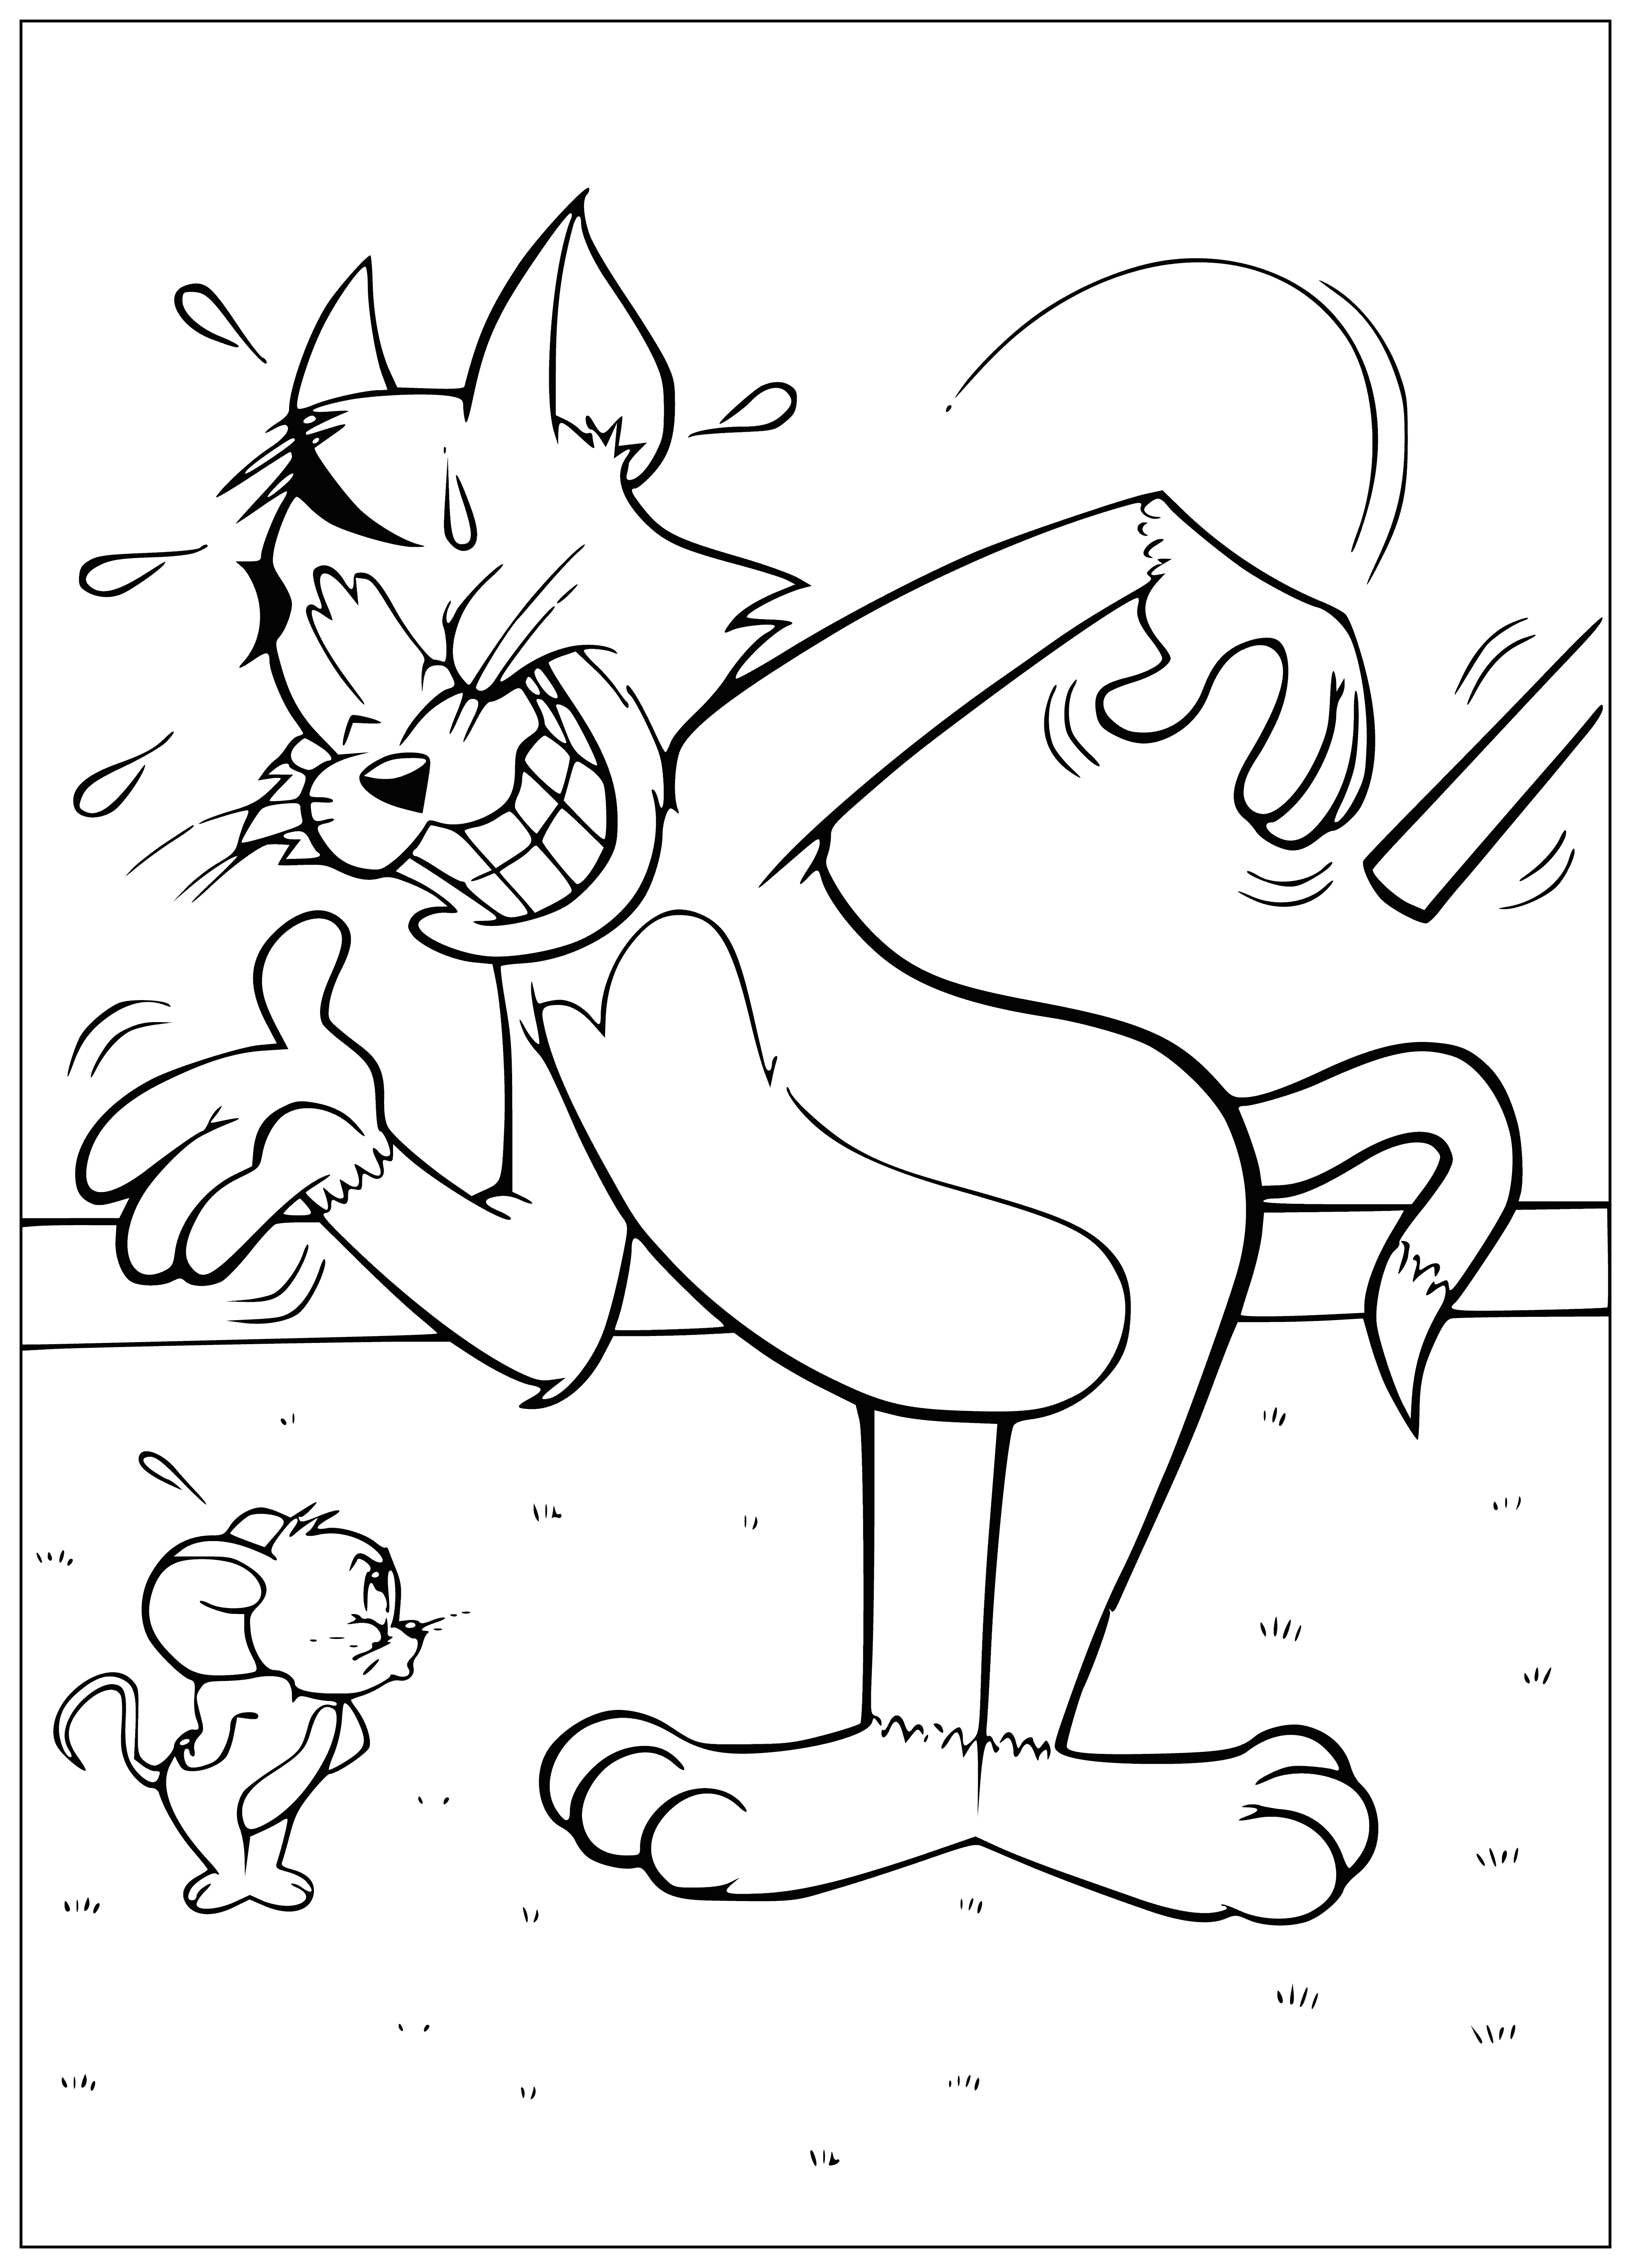 coloring page: Tom and Jerry are fighting, with a broom swinging and Jerry dodging and laughing, resulting in a mess on the floor.